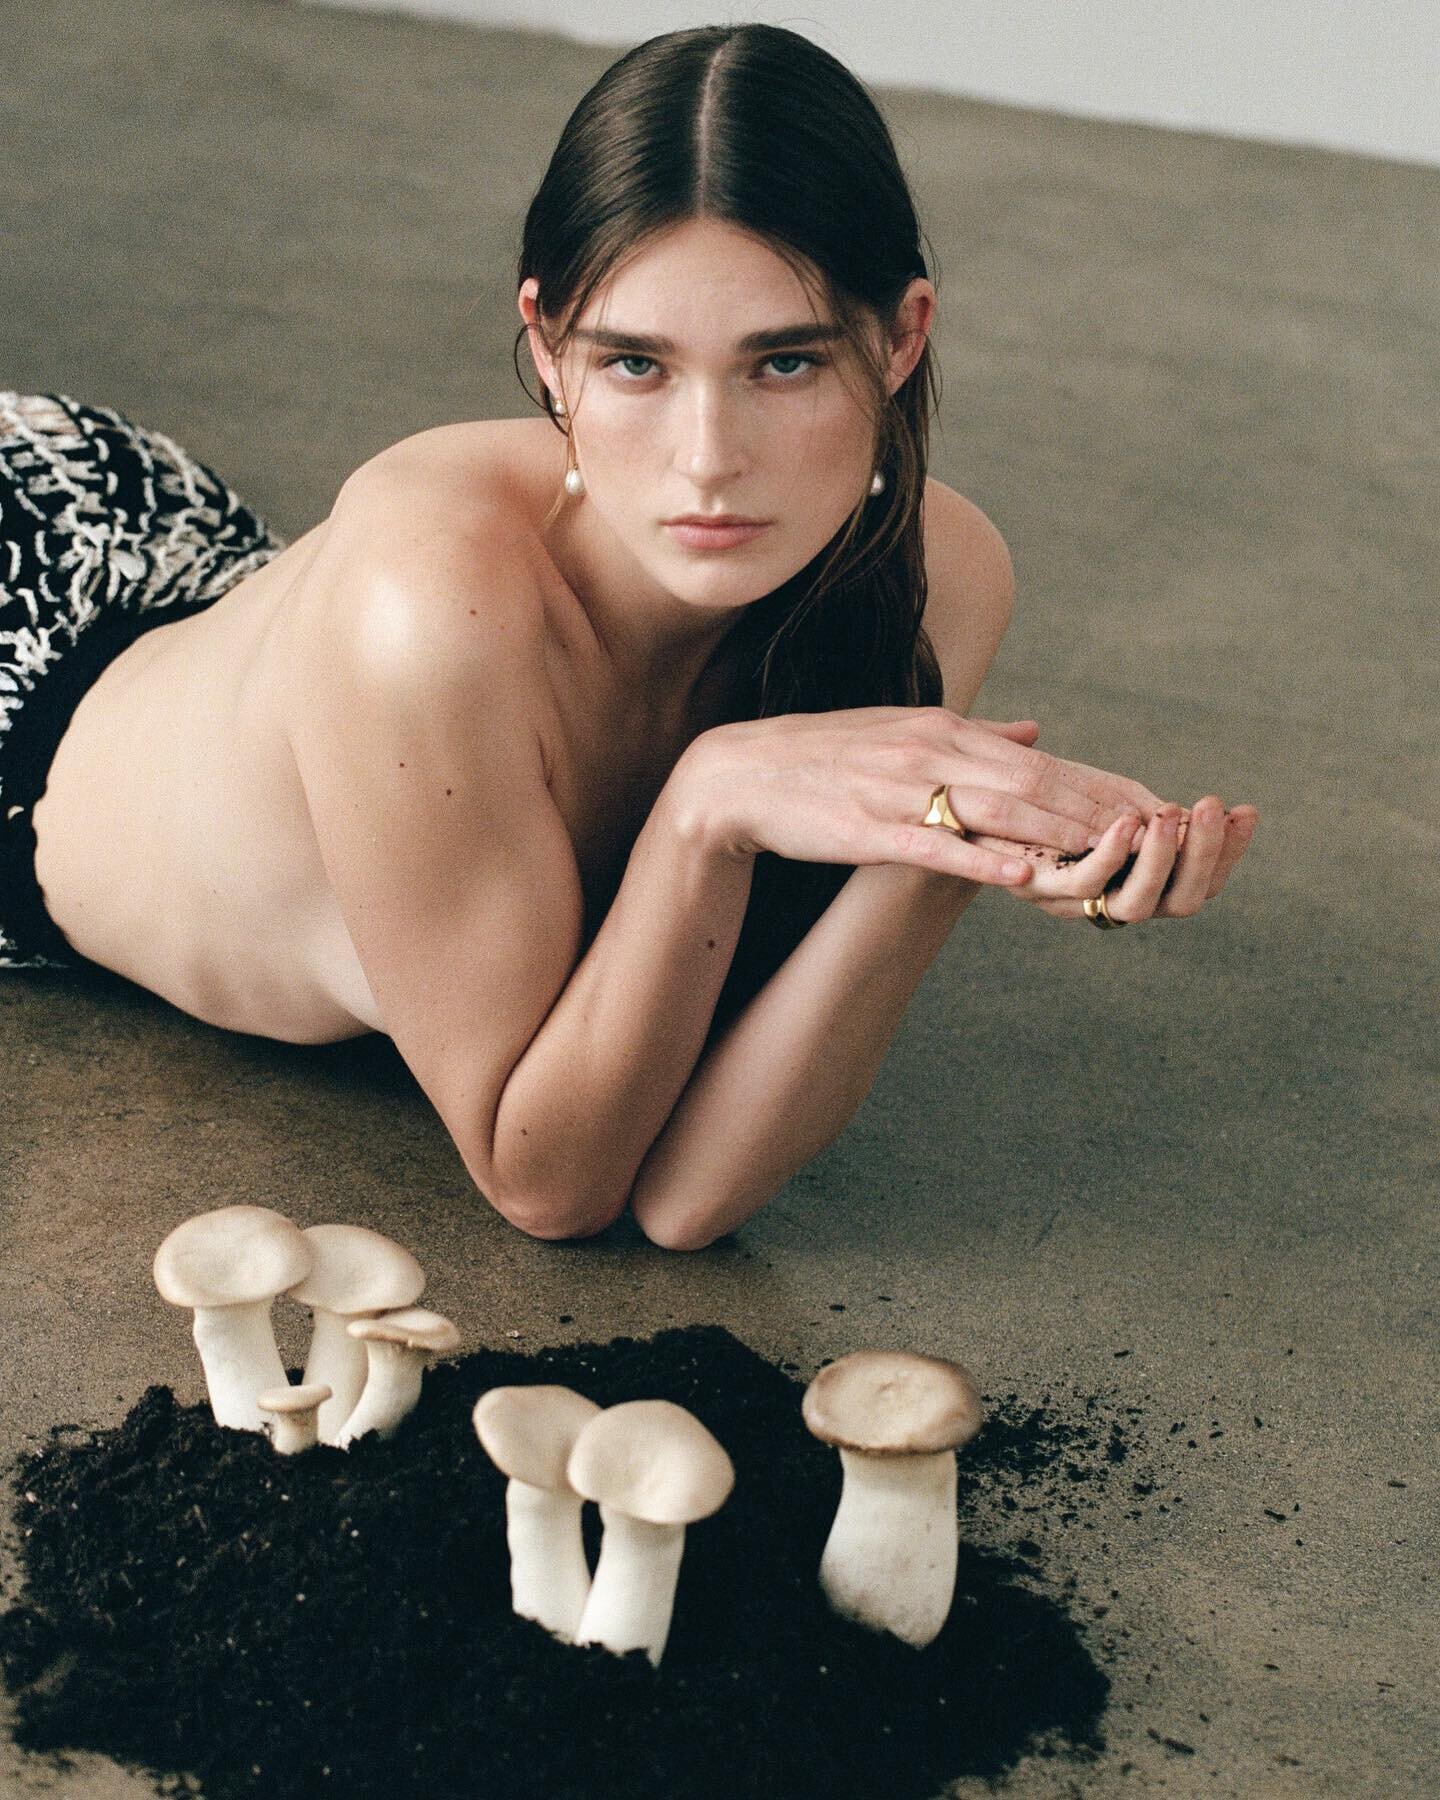 Down to Earth 🍄 
⠀⠀⠀⠀⠀⠀⠀⠀⠀
A shroomy editorial #shotatpepper by @claireleahy for @one_magazine, featuring @katyokane.
⠀⠀⠀⠀⠀⠀⠀⠀⠀
Special credits &amp; thanks for visiting our studio: 

Stylist @hannahhauge
Prop Stylist @sofiabrancokraft
Makeup @lilly